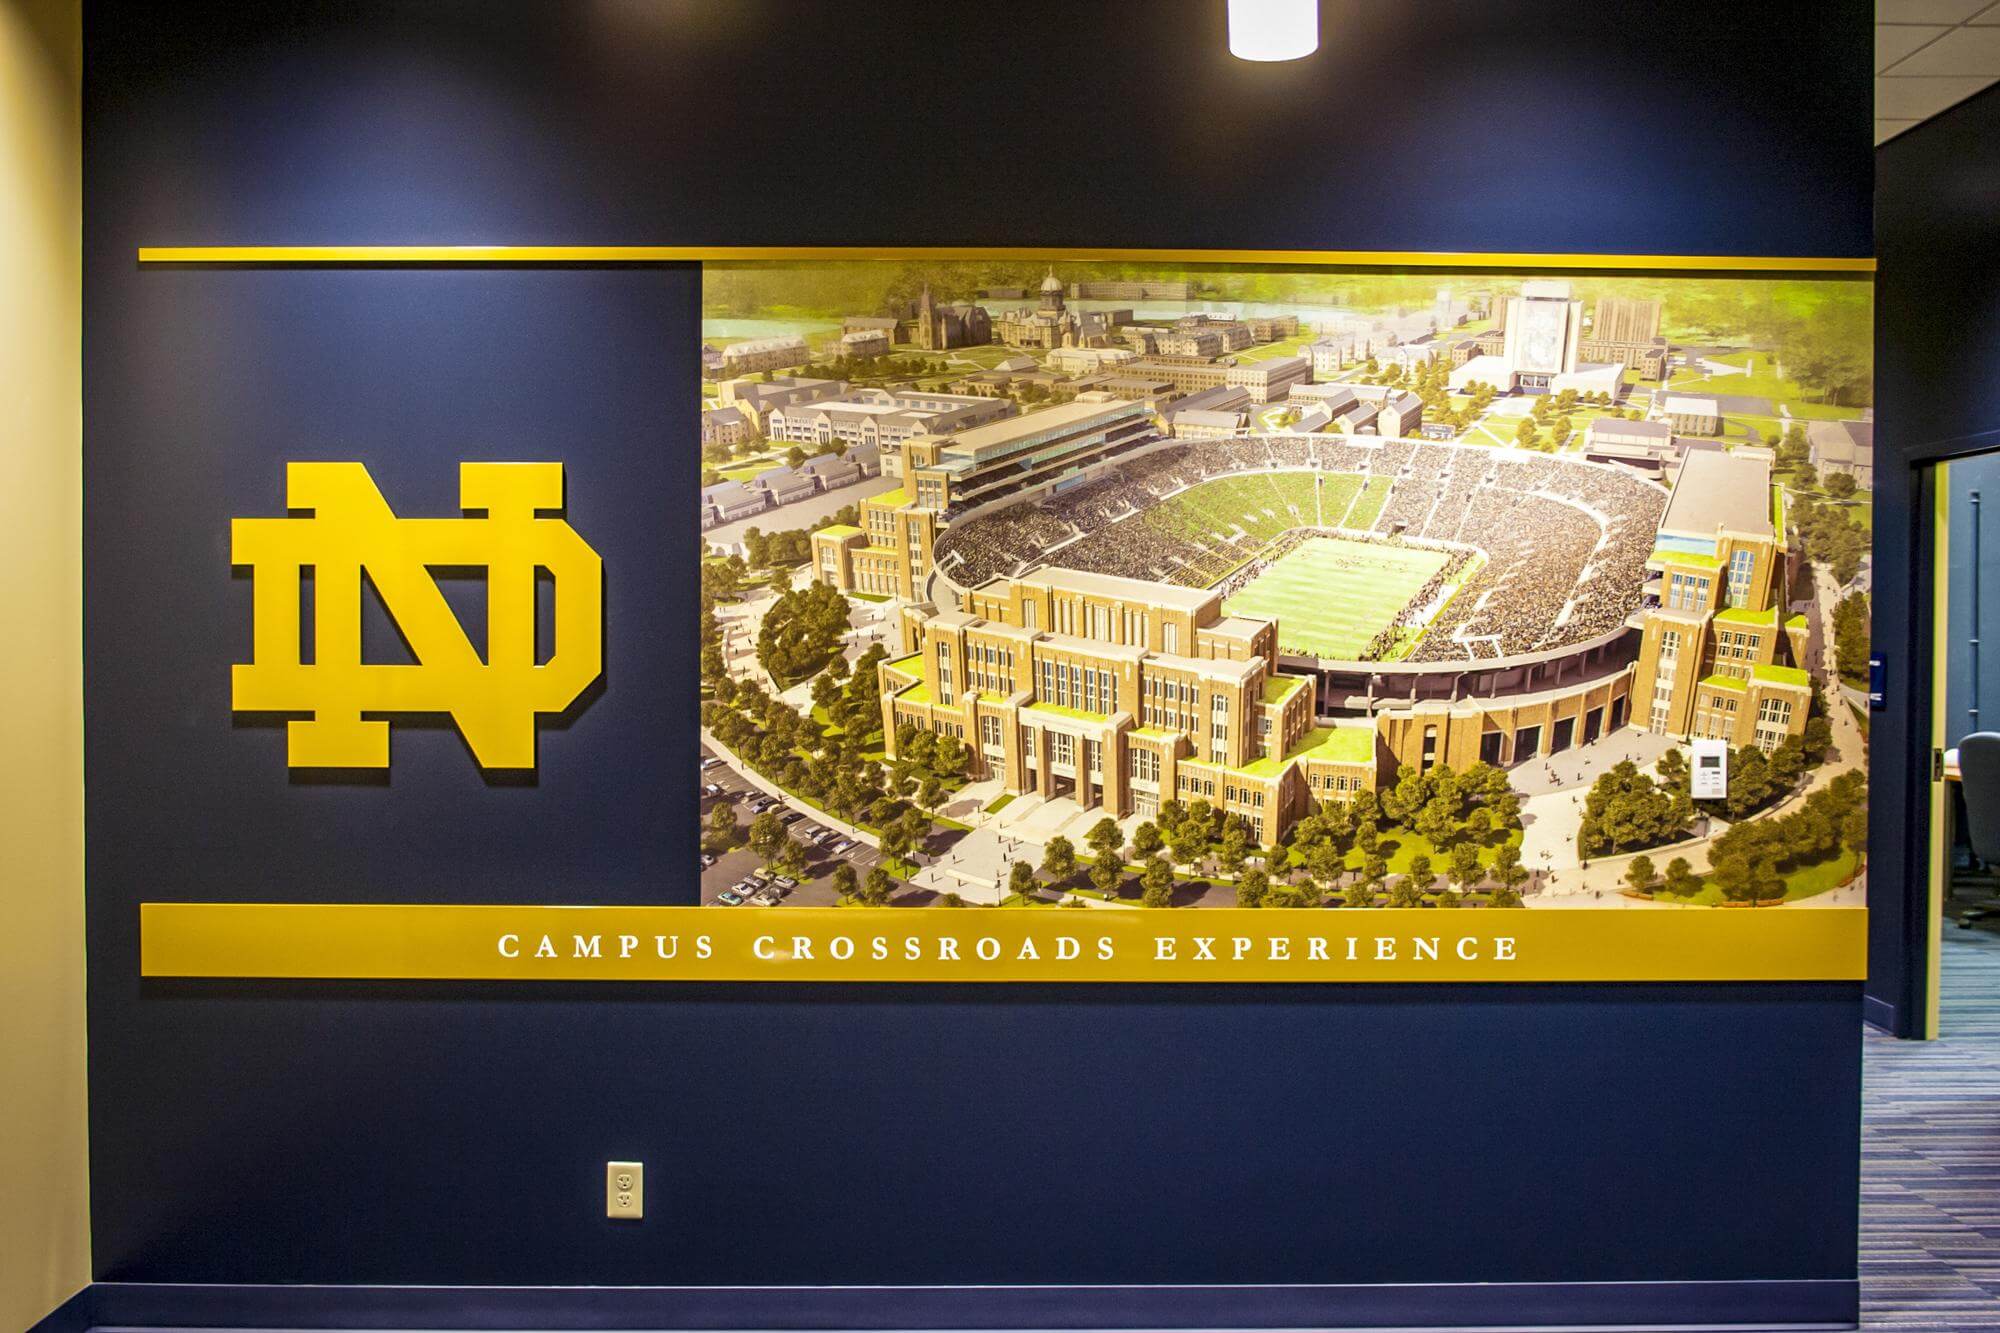 Notre Dame Experience Center